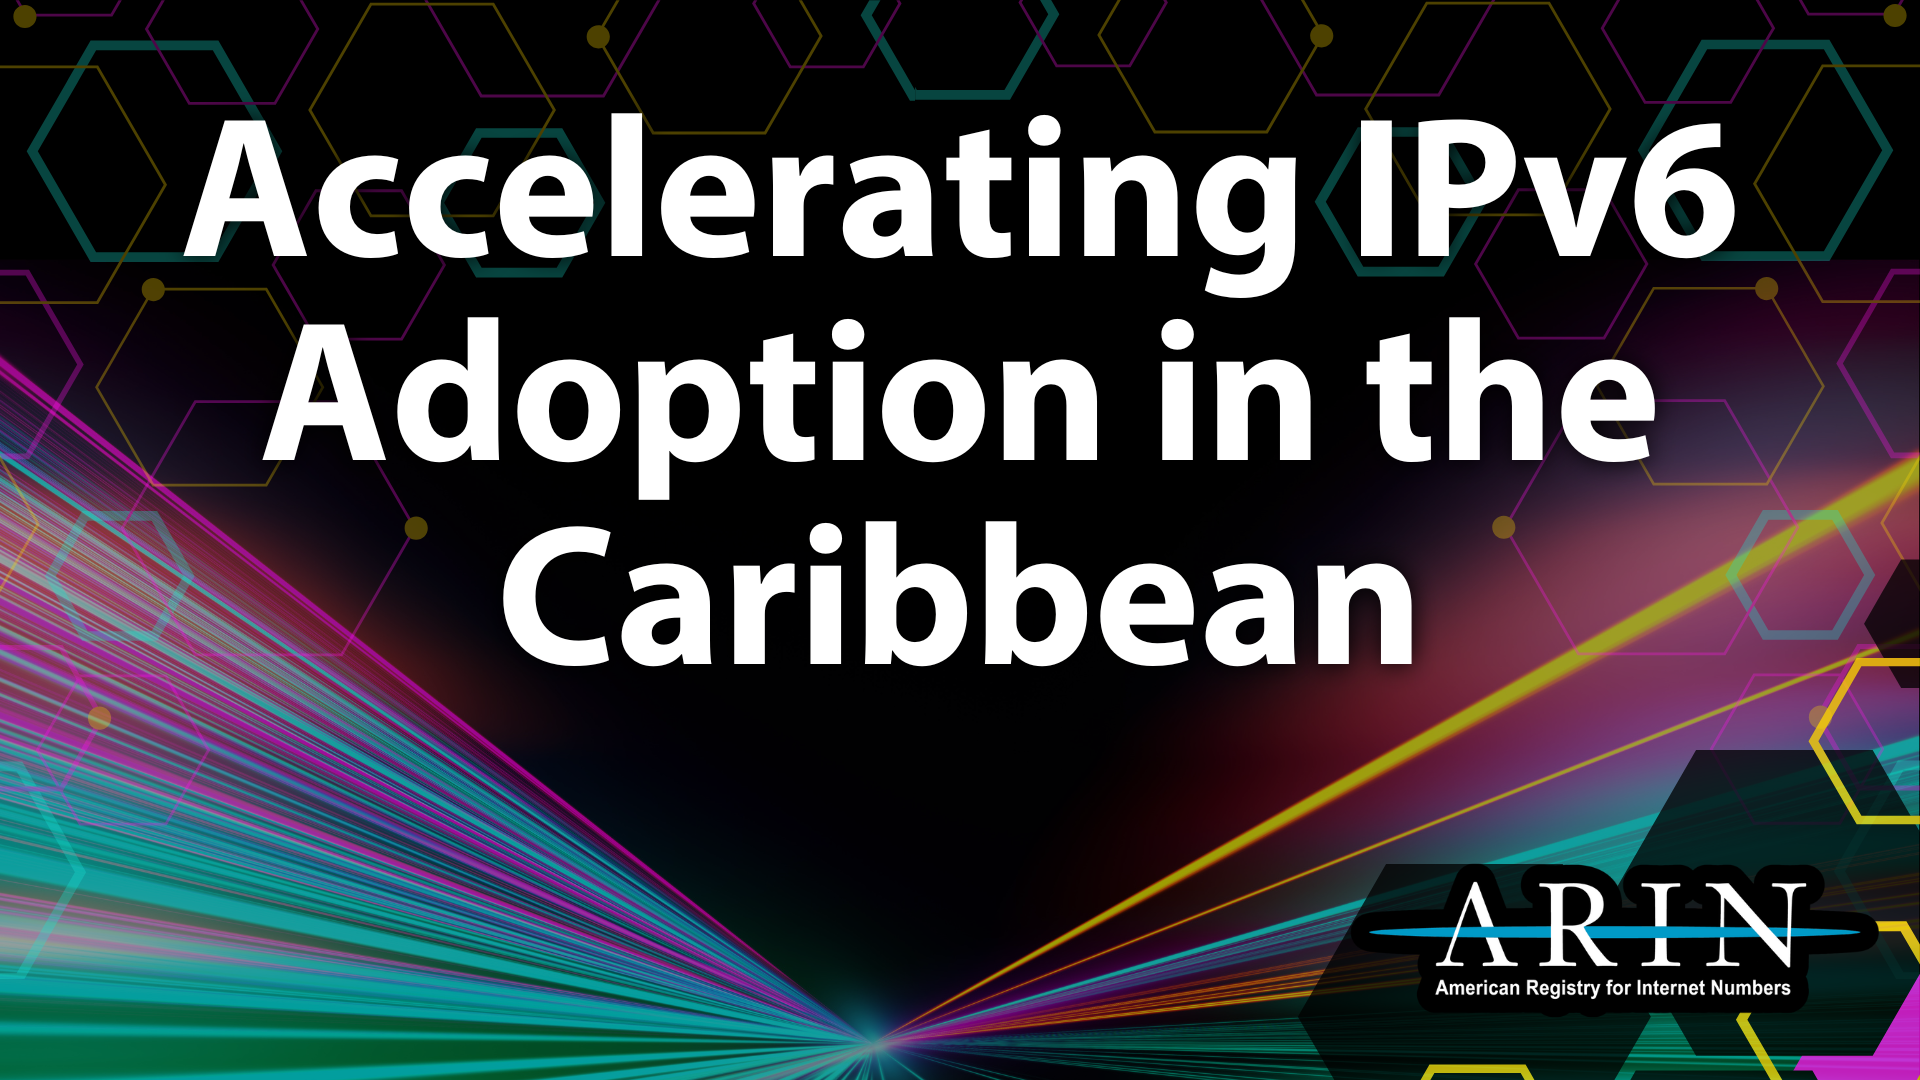 Read the blog Accelerating IPv6 Adoption in the Caribbean